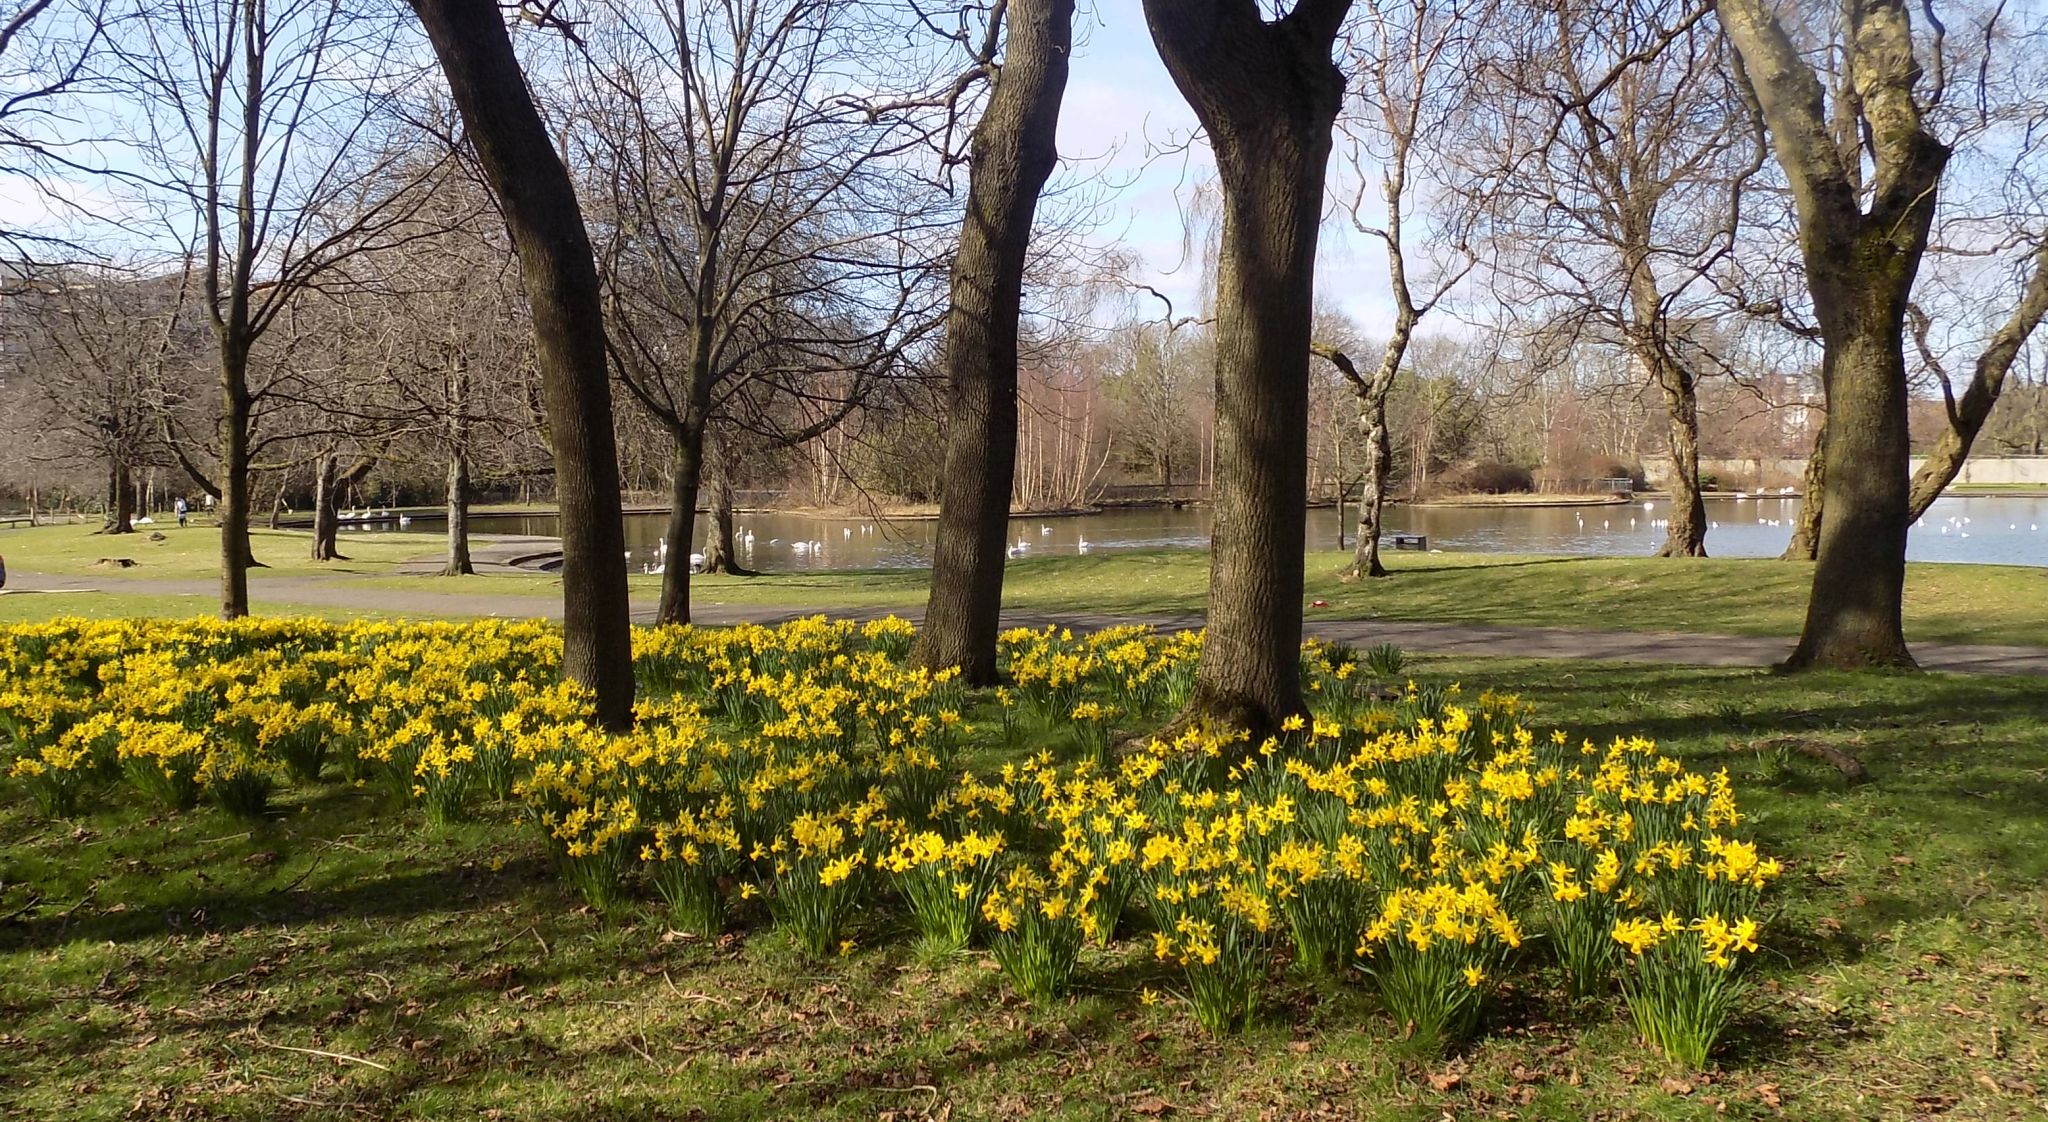 Daffodils at springtime in Richmond Park